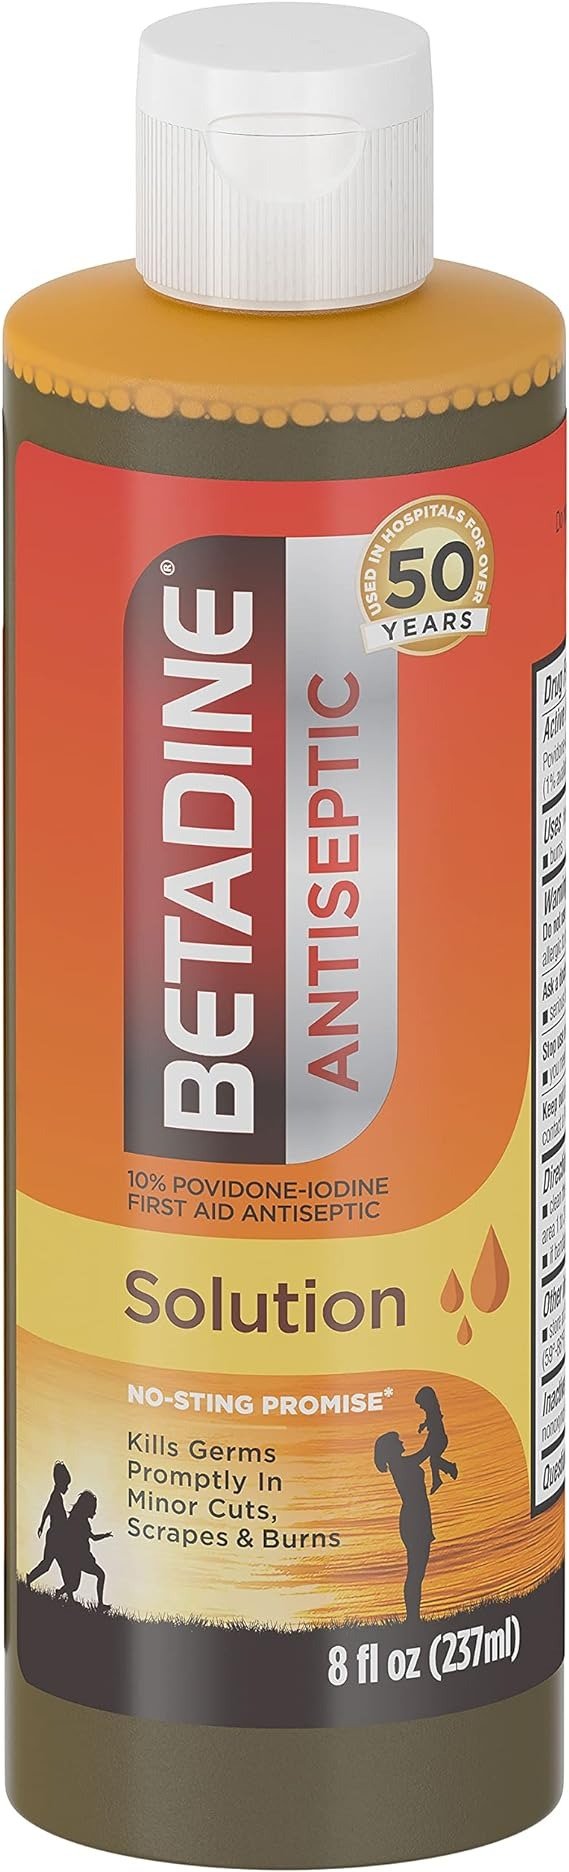 Antiseptic Liquid First Aid Solution, Povidone-iodine 10%, Infection Protection, Kills Germs In Minor Cuts Scrapes And Burns, No Sting Promise, No Alcohol or Hydrogen Peroxide, 8 FL OZ